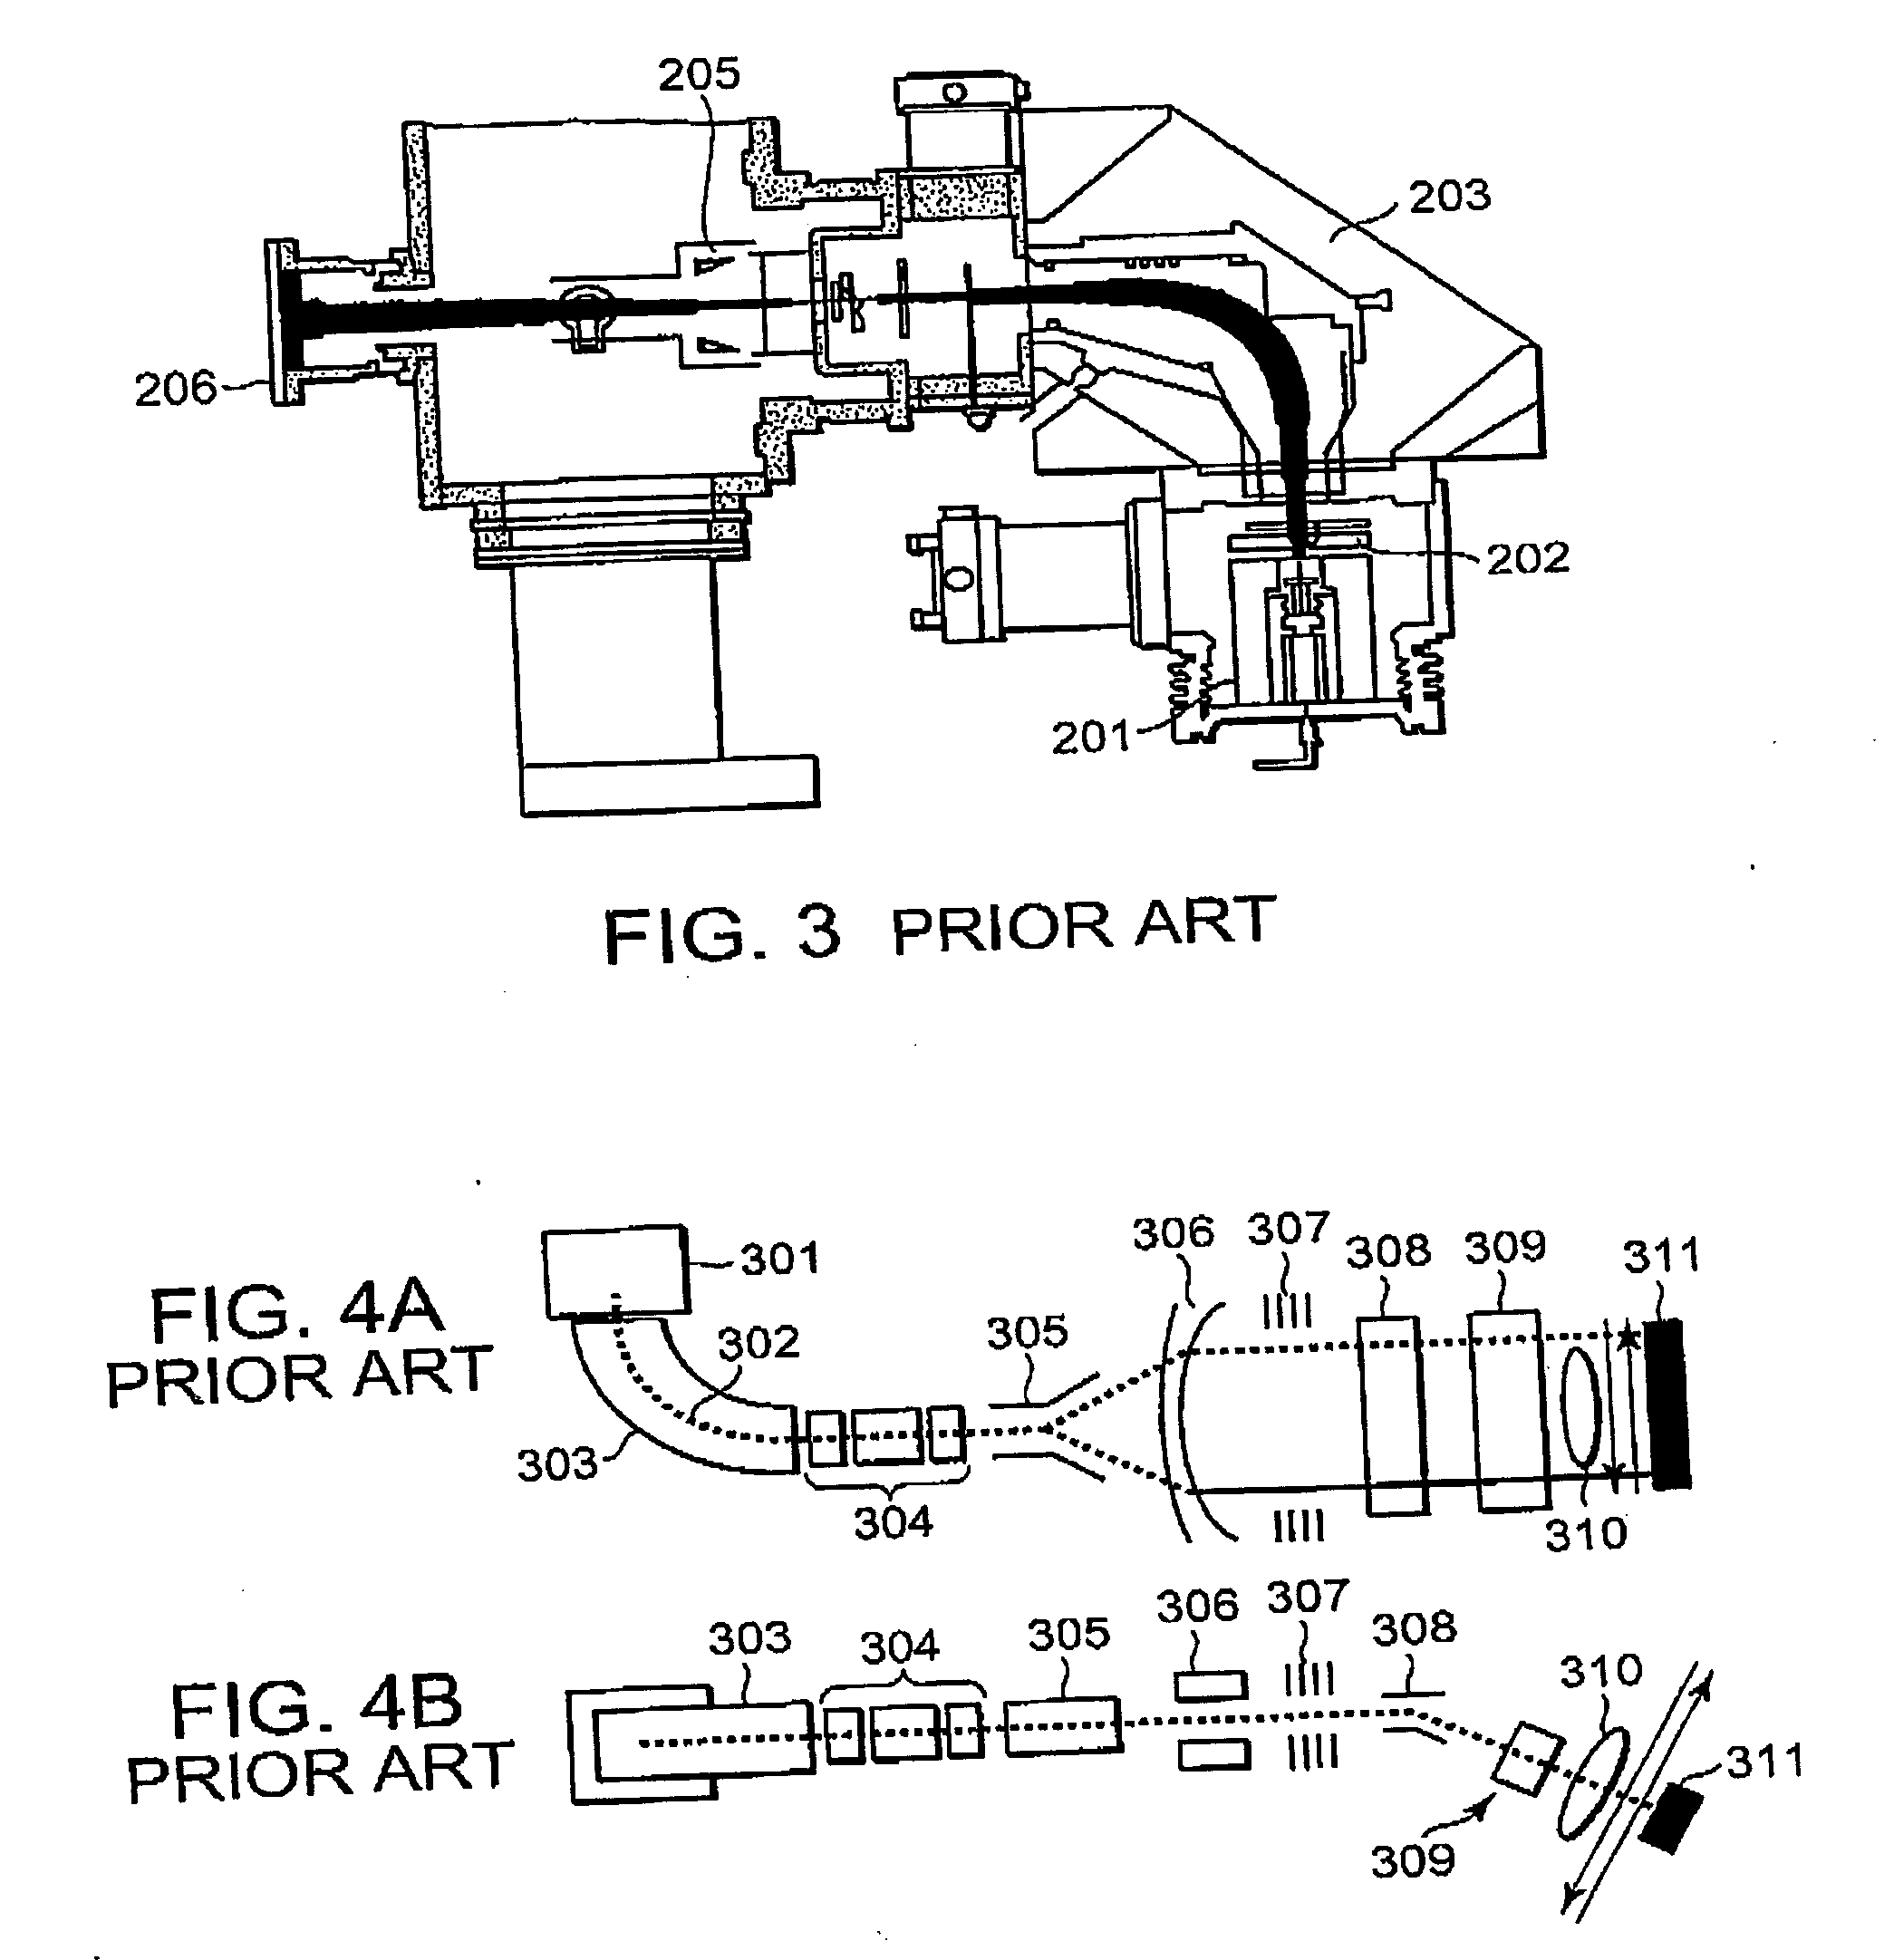 Method to increase low-energy beam current in irradiation system with ion beam